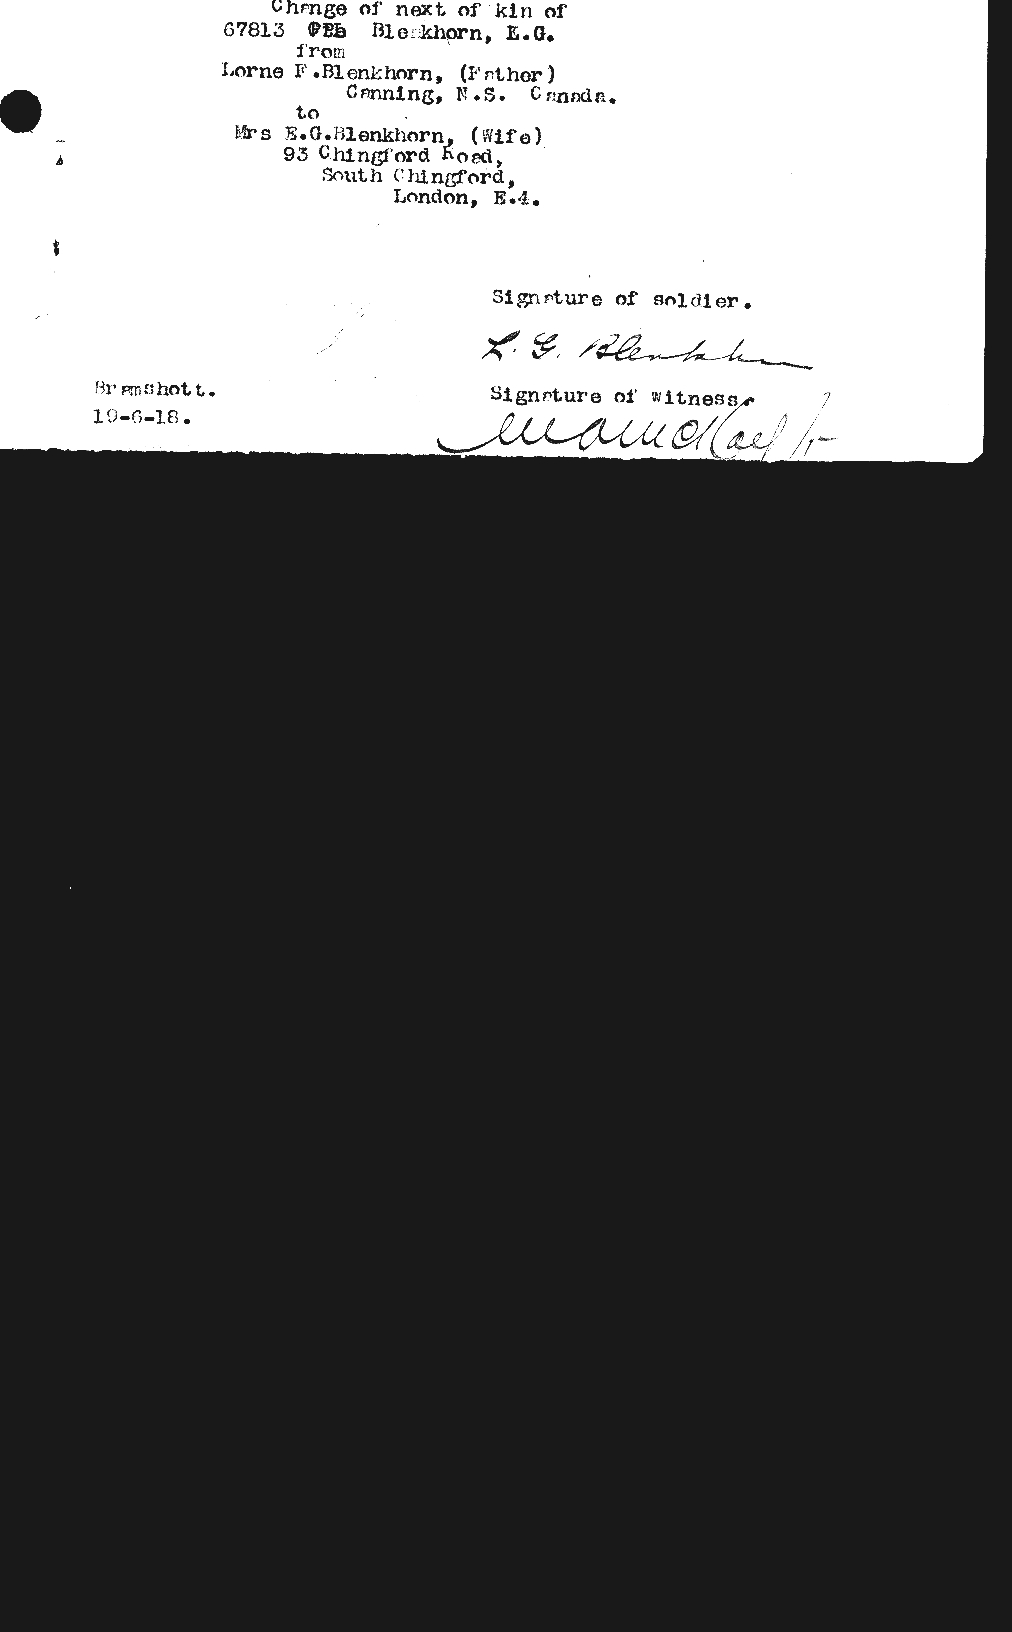 Personnel Records of the First World War - CEF 247976a